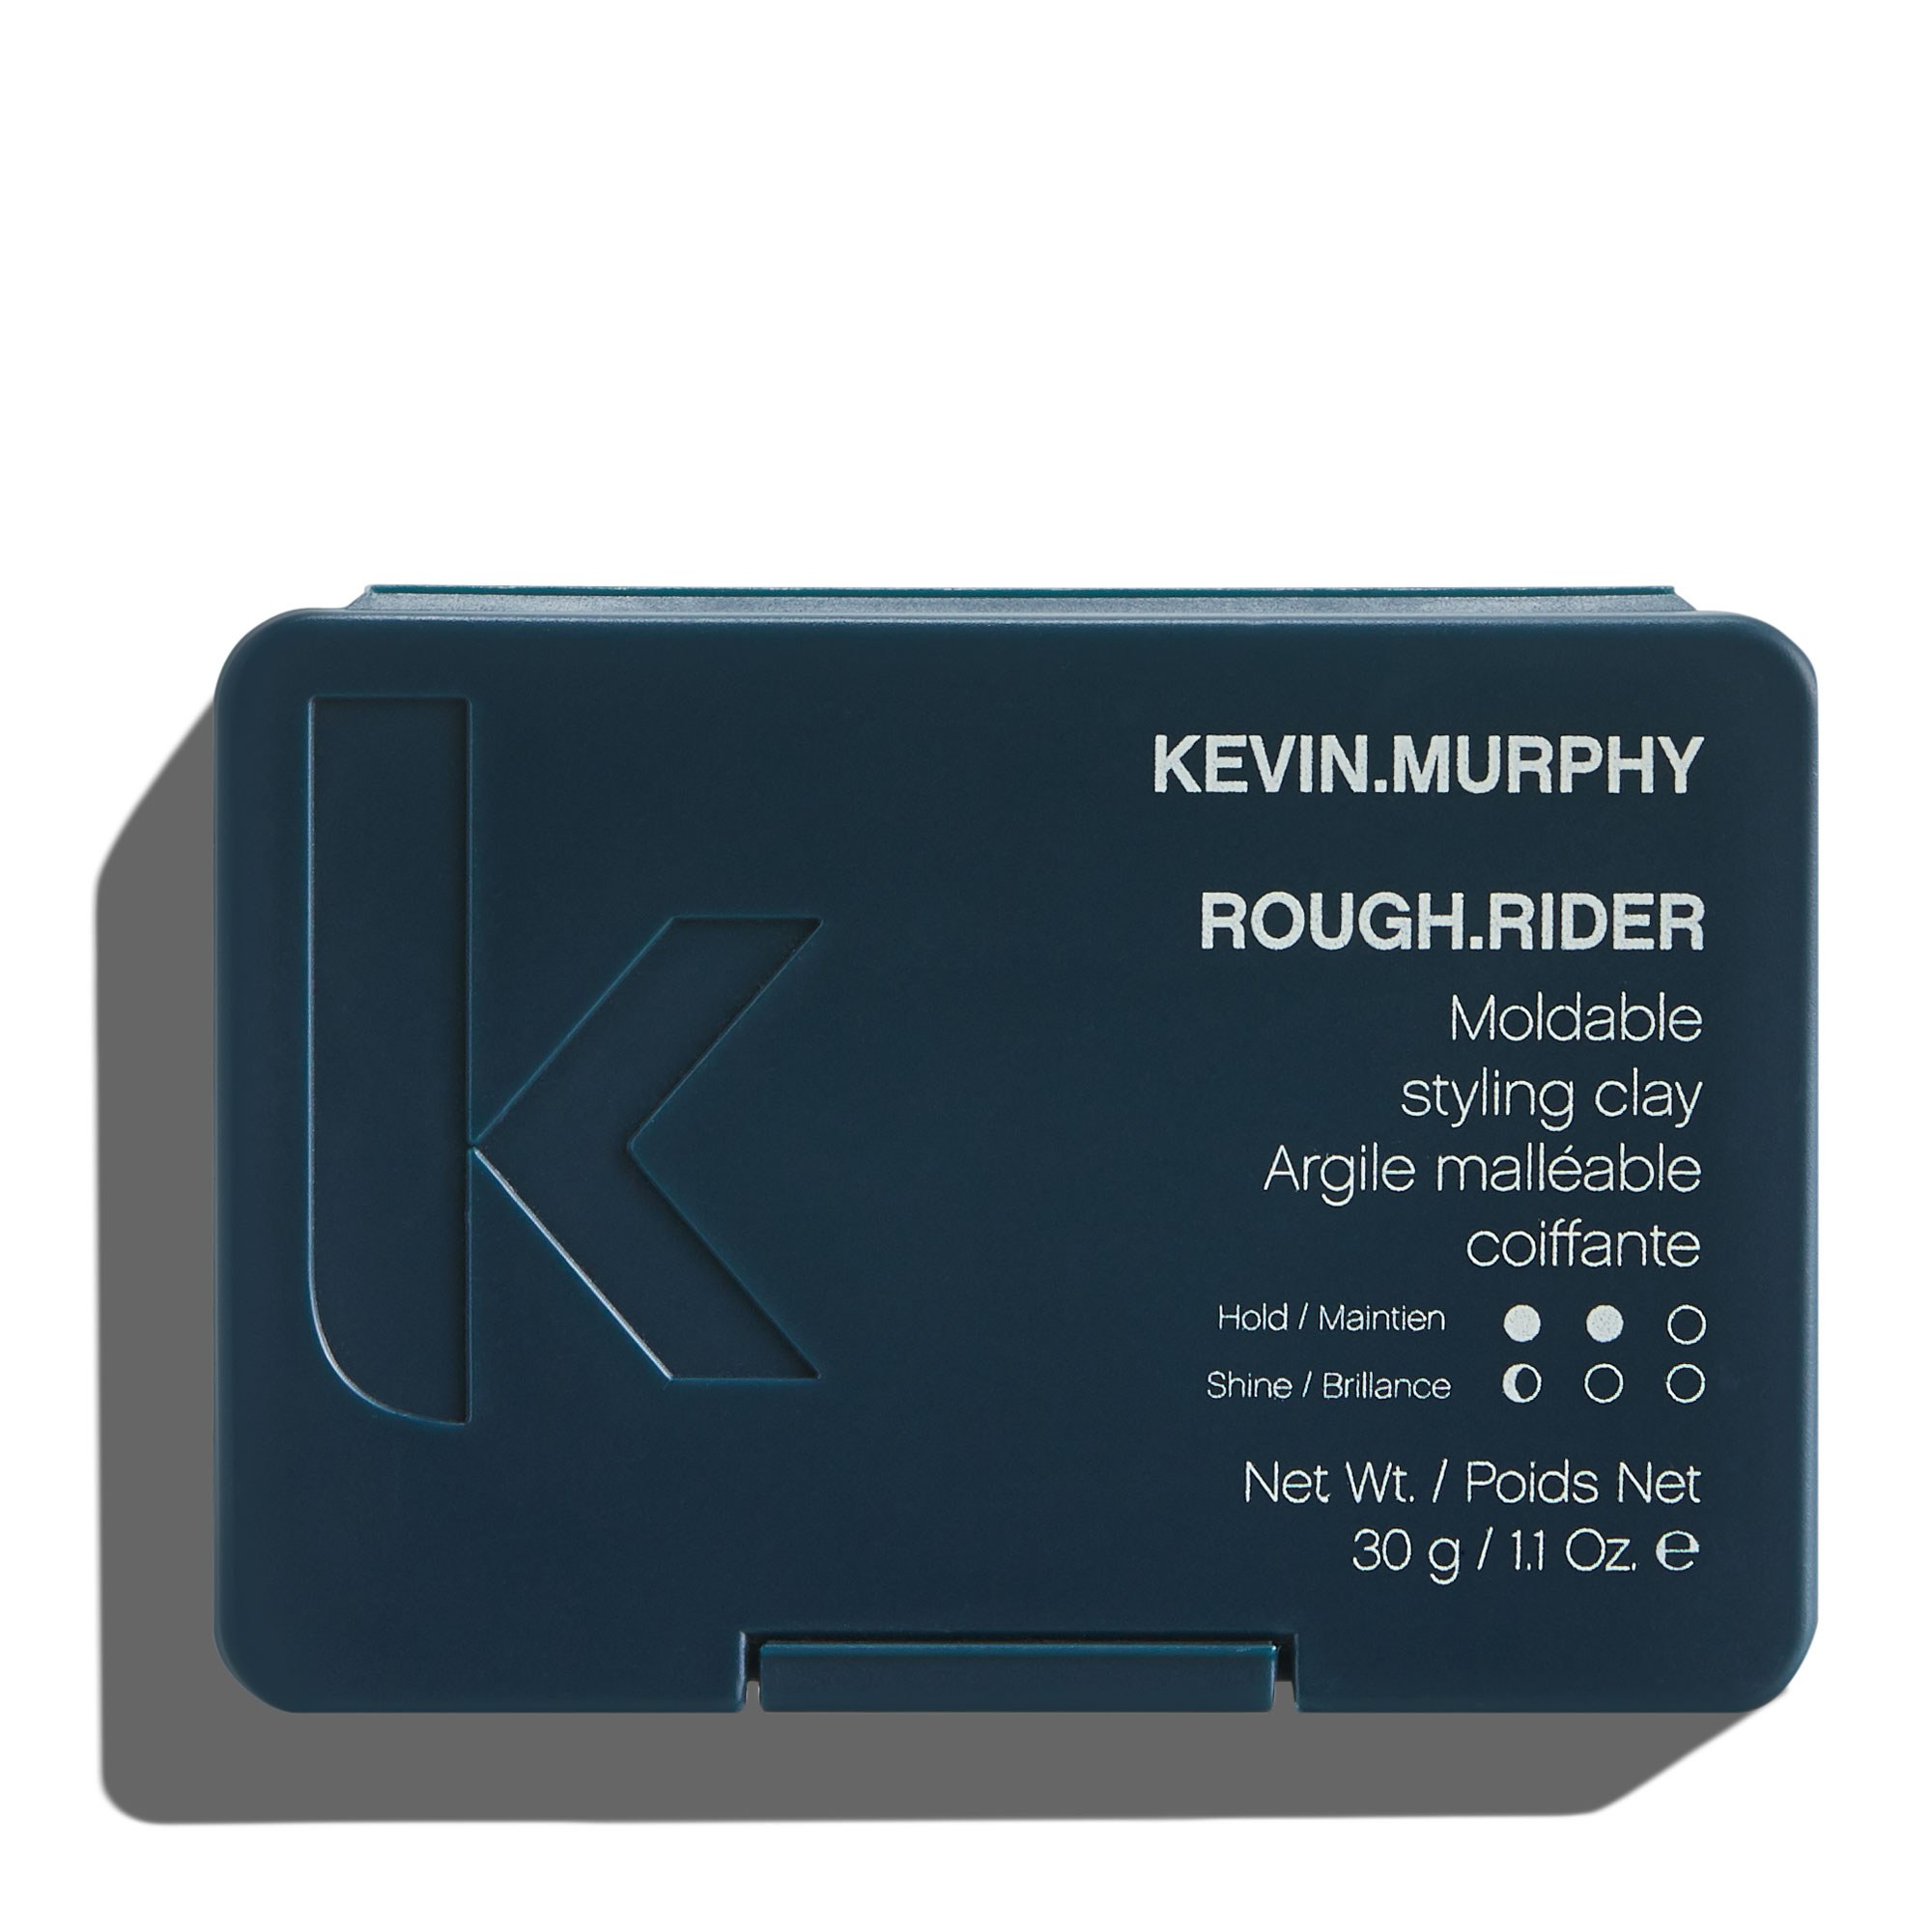 KEVIN.MURPHY For Men: ROUGH.RIDER 3.4oz